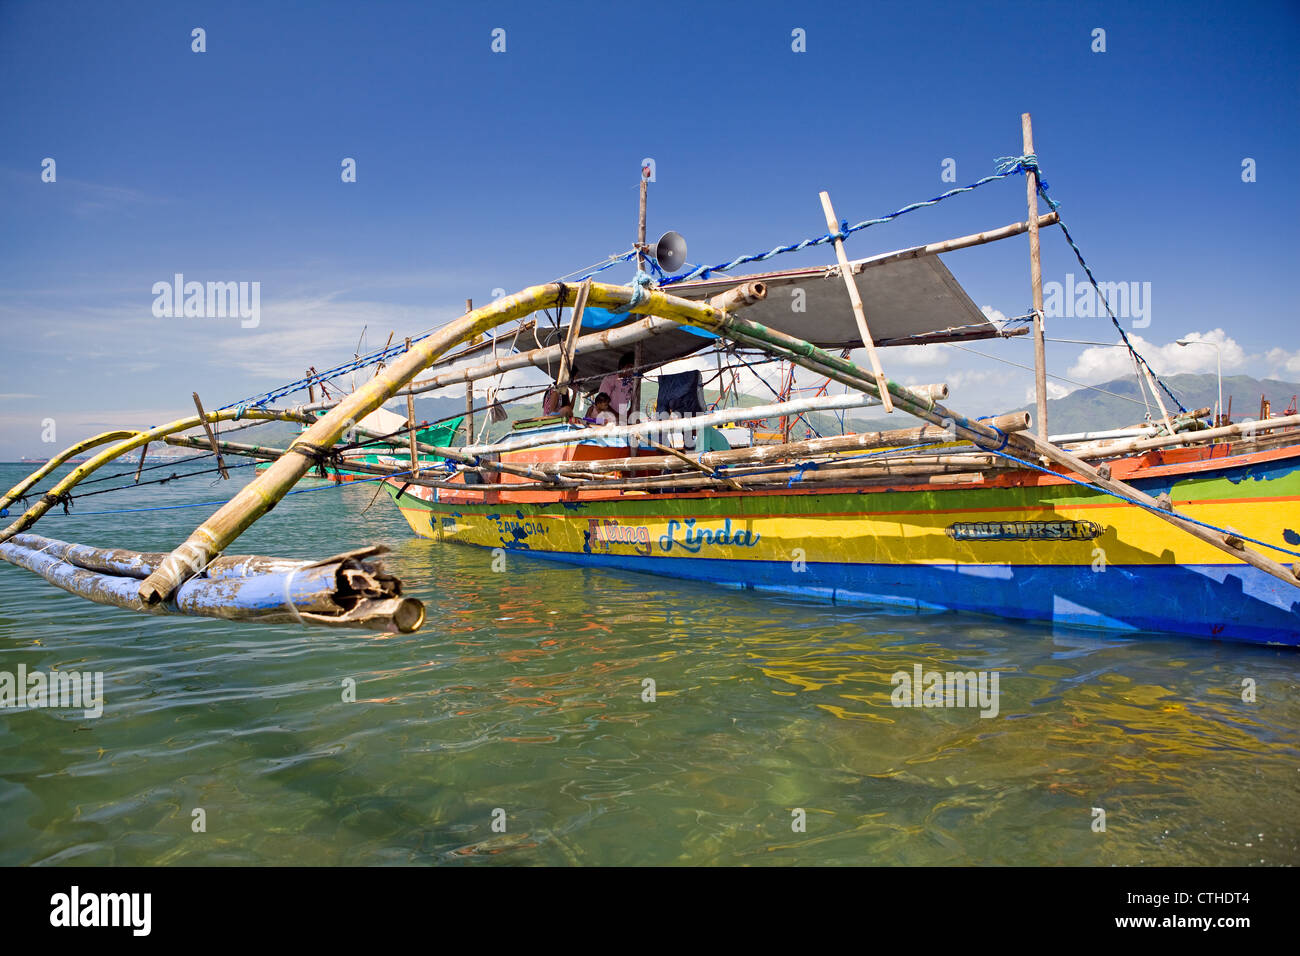 Filipino paraw is a large outrigger canoe used for commercial fishing and inter-island travel. Subic Bay, Luzon Island, Philippines. Stock Photo